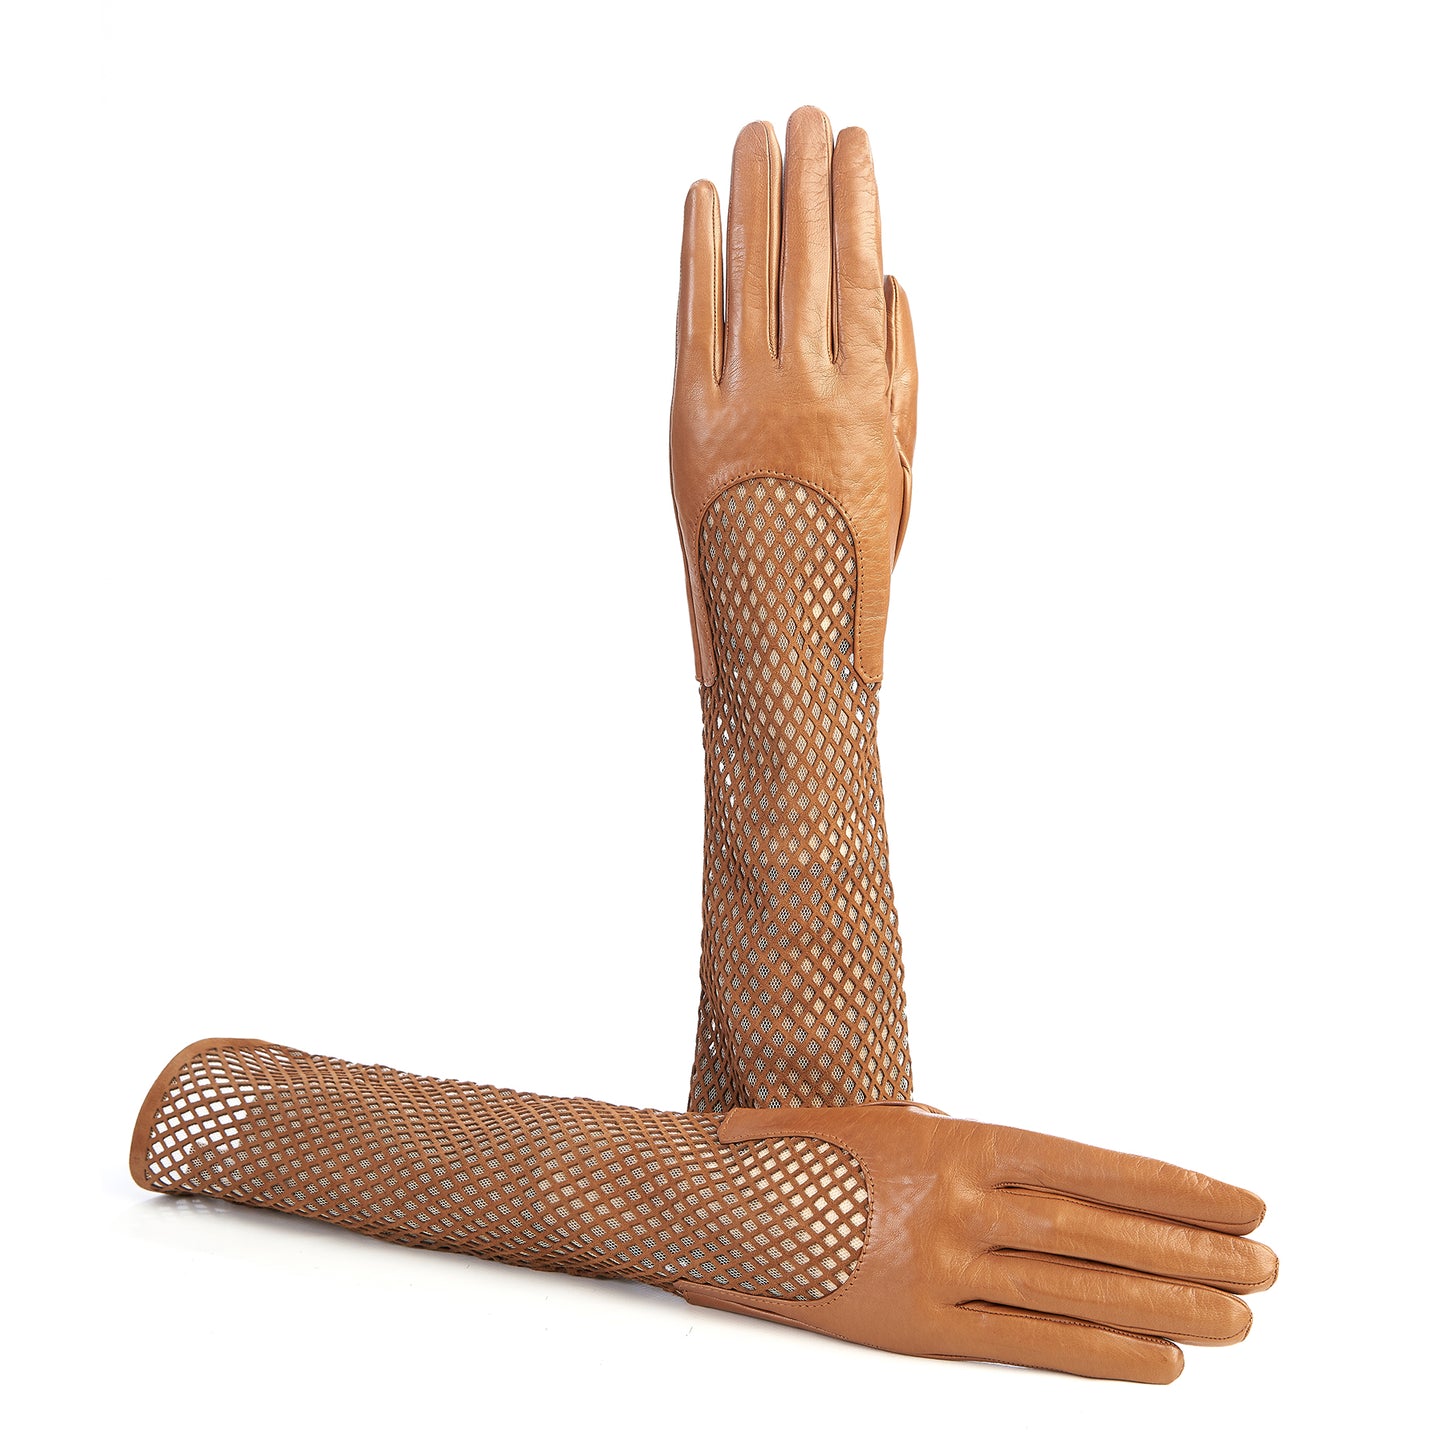 Women's genuine leather gloves in camel nappa and suede elbow lenght sleeve with particular design